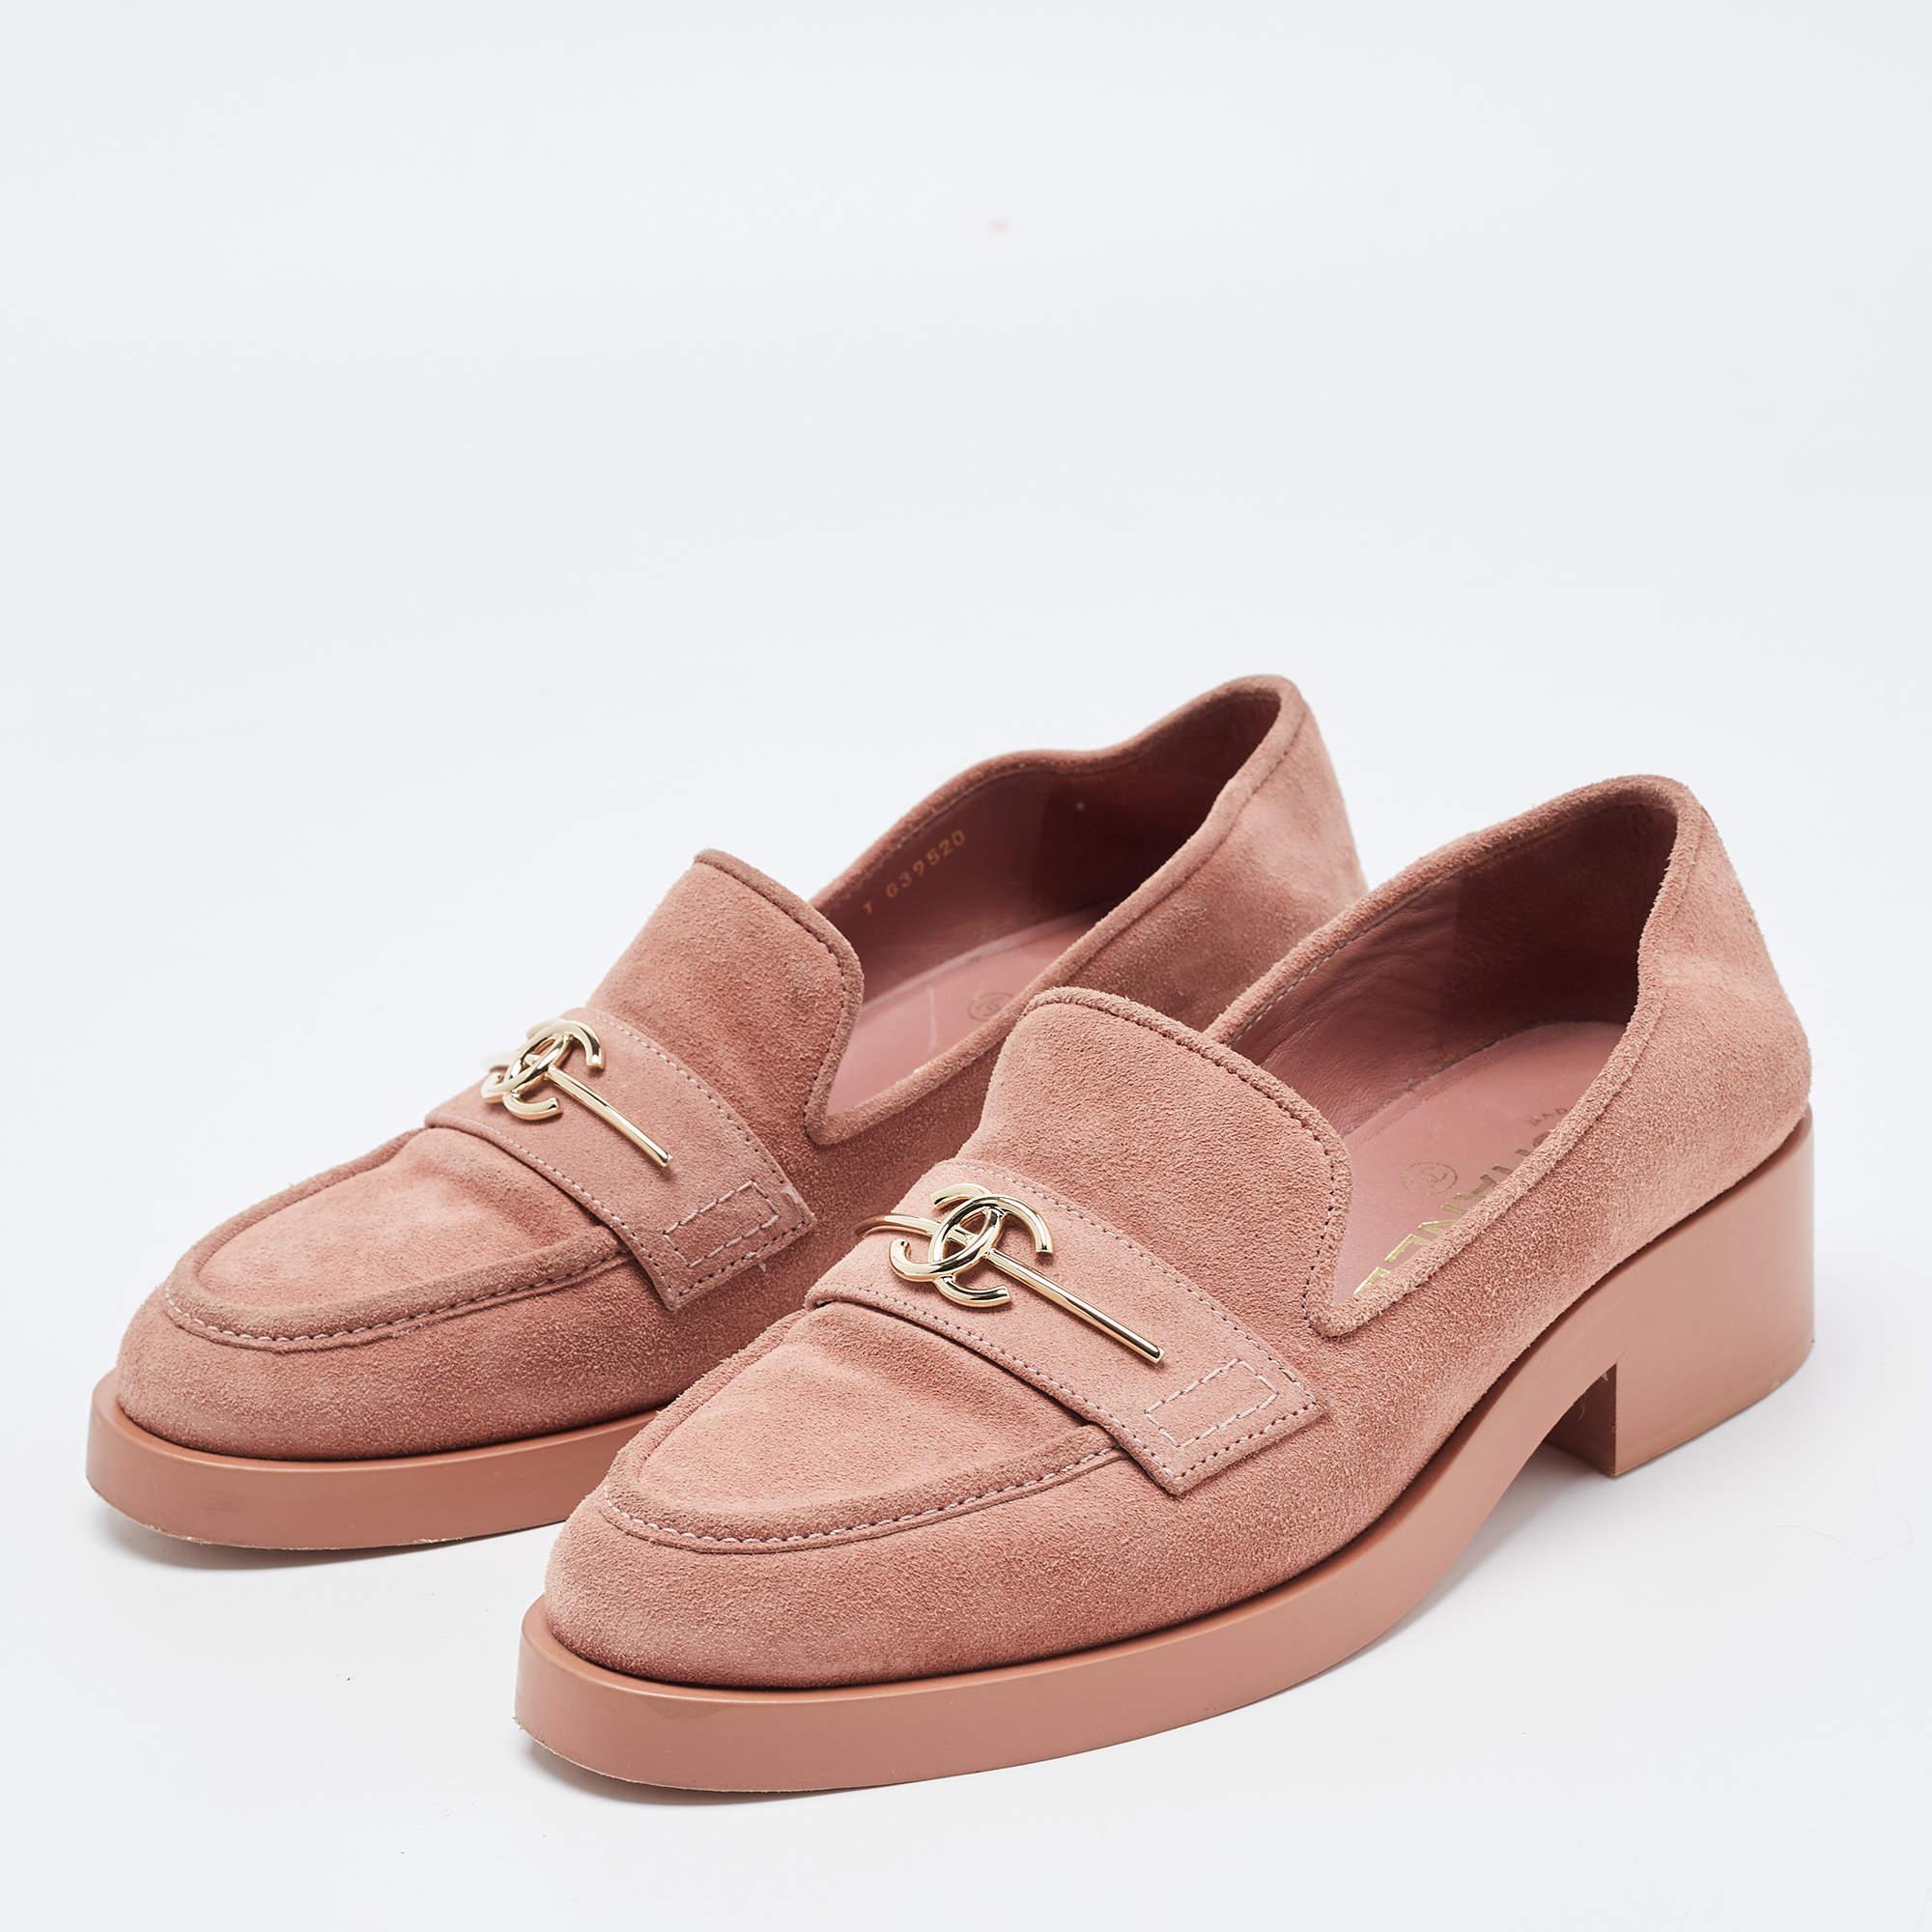 These designer loafers by Chanel will be your favorite go-to pair for off-duty looks. Crafted using pink suede, the shoes have round toes and short heels.

